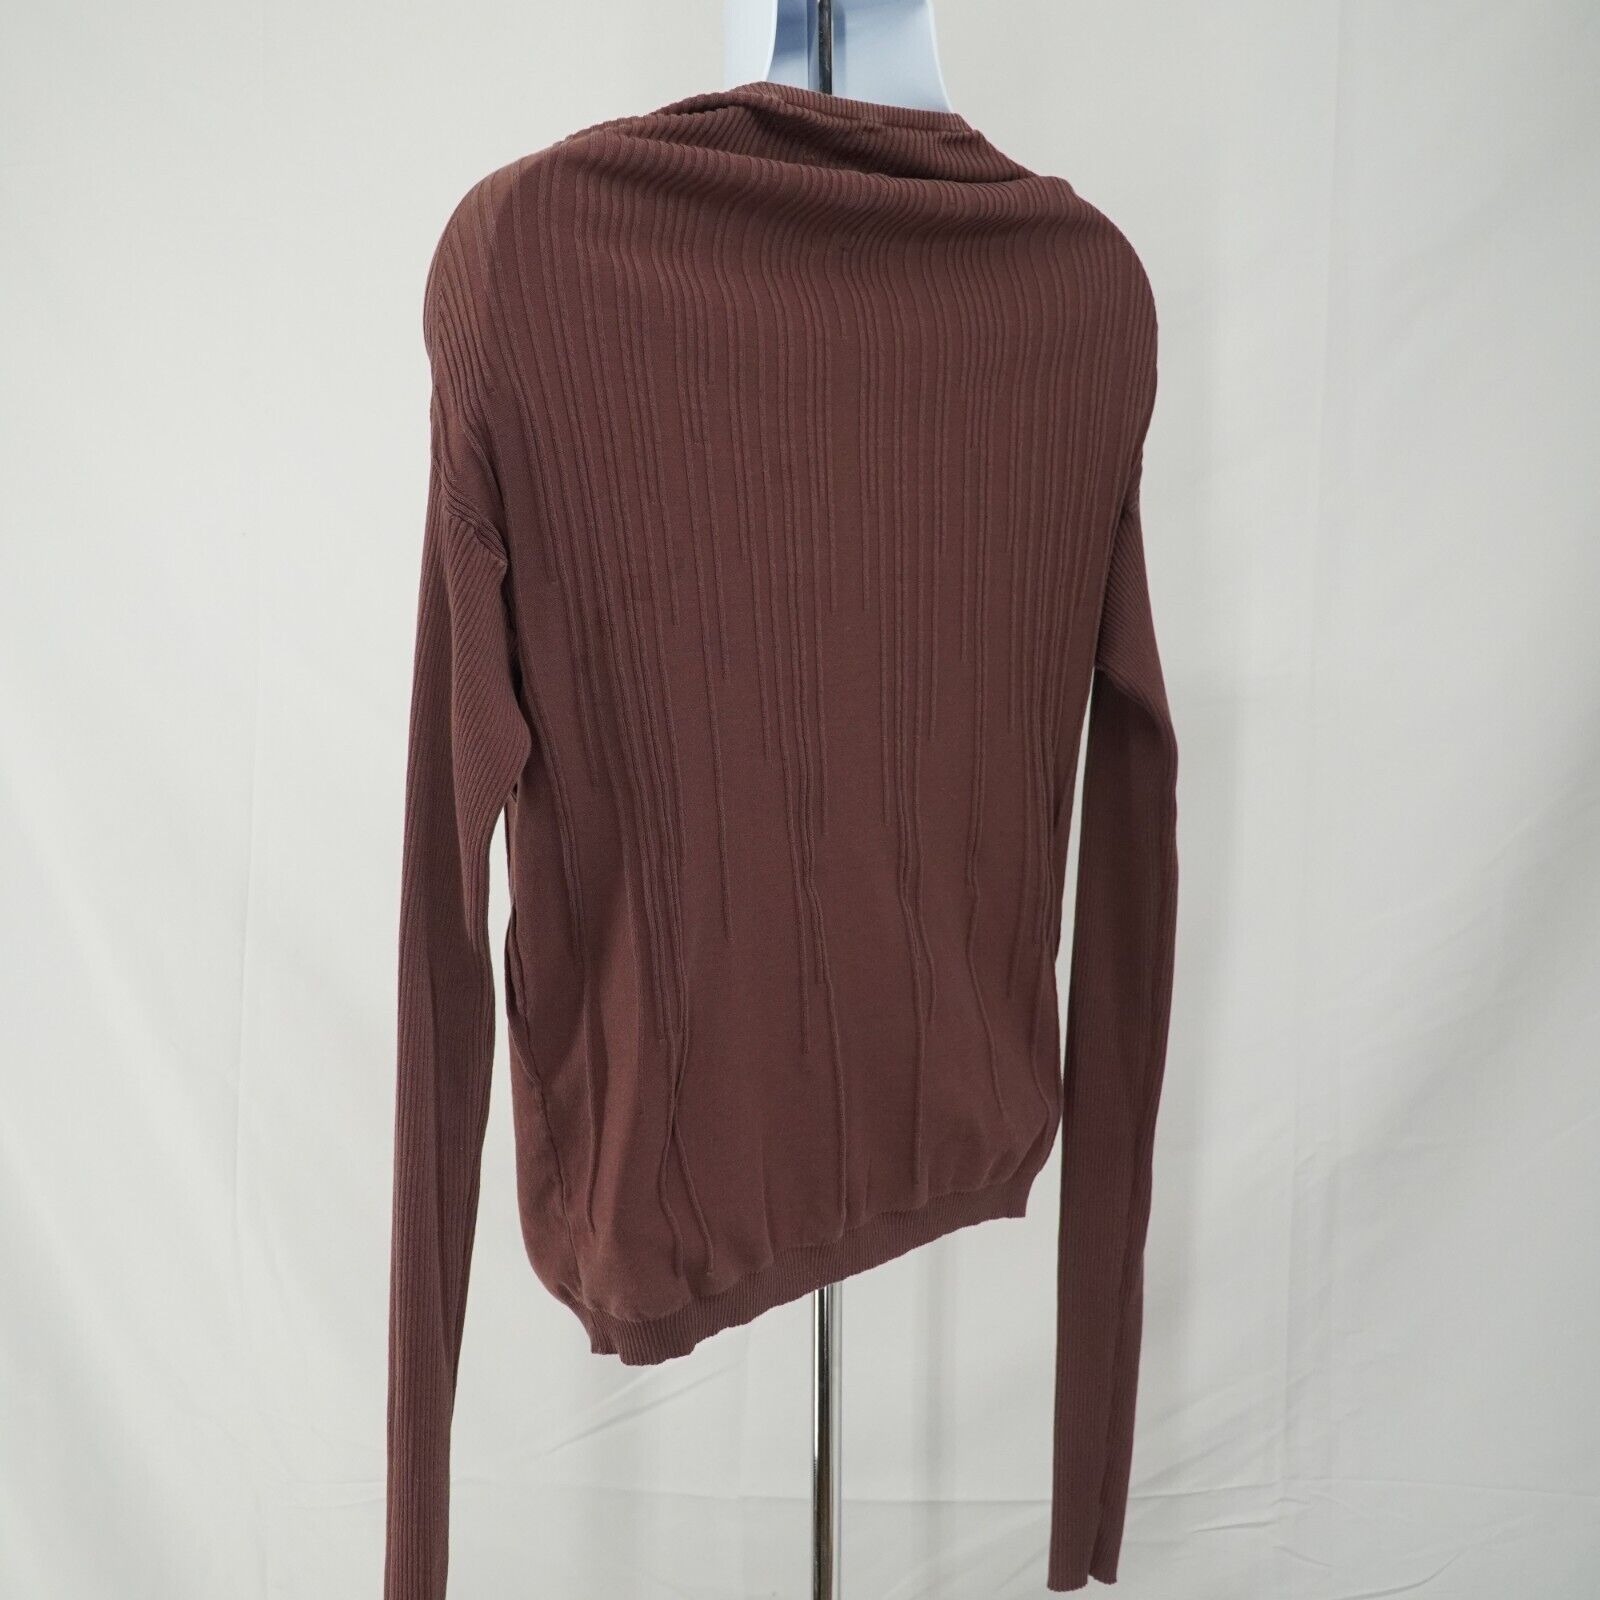 Ribbed Sweater SS17 Walrus Throat Burgundy Red - 8